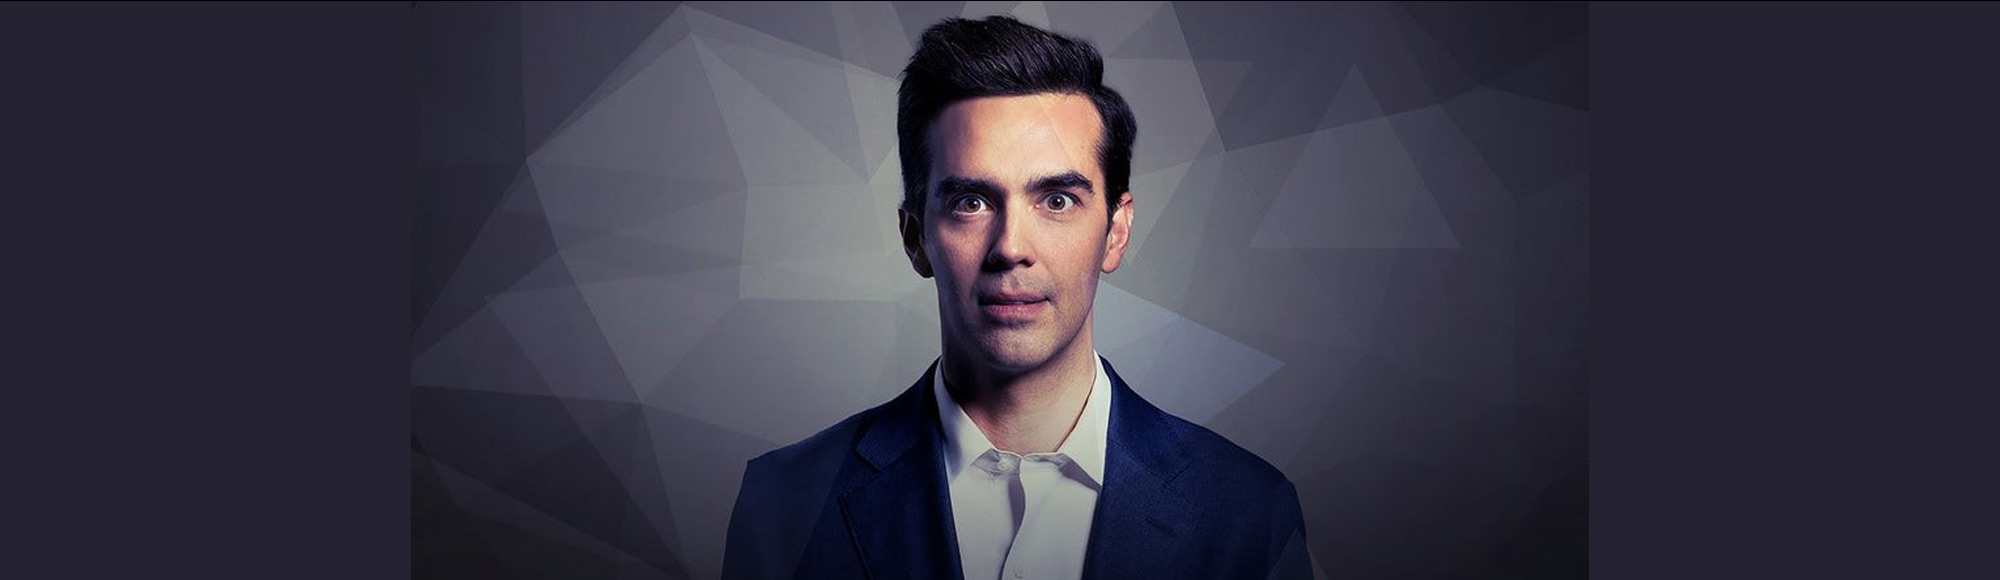 Michael Carbonaro - Lies on Stage show